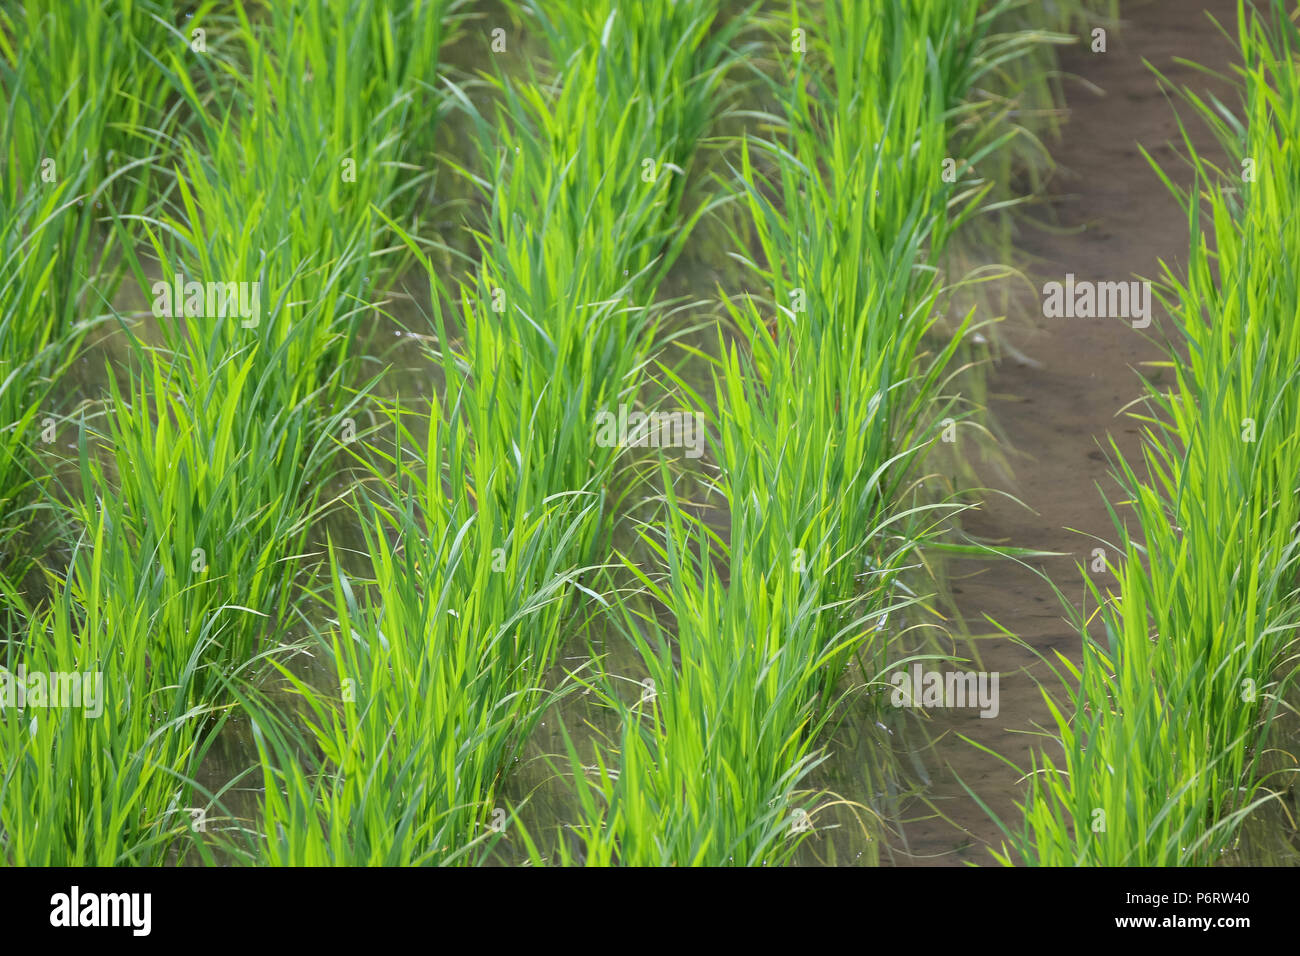 Freshly planted rice rows in flooded field Stock Photo